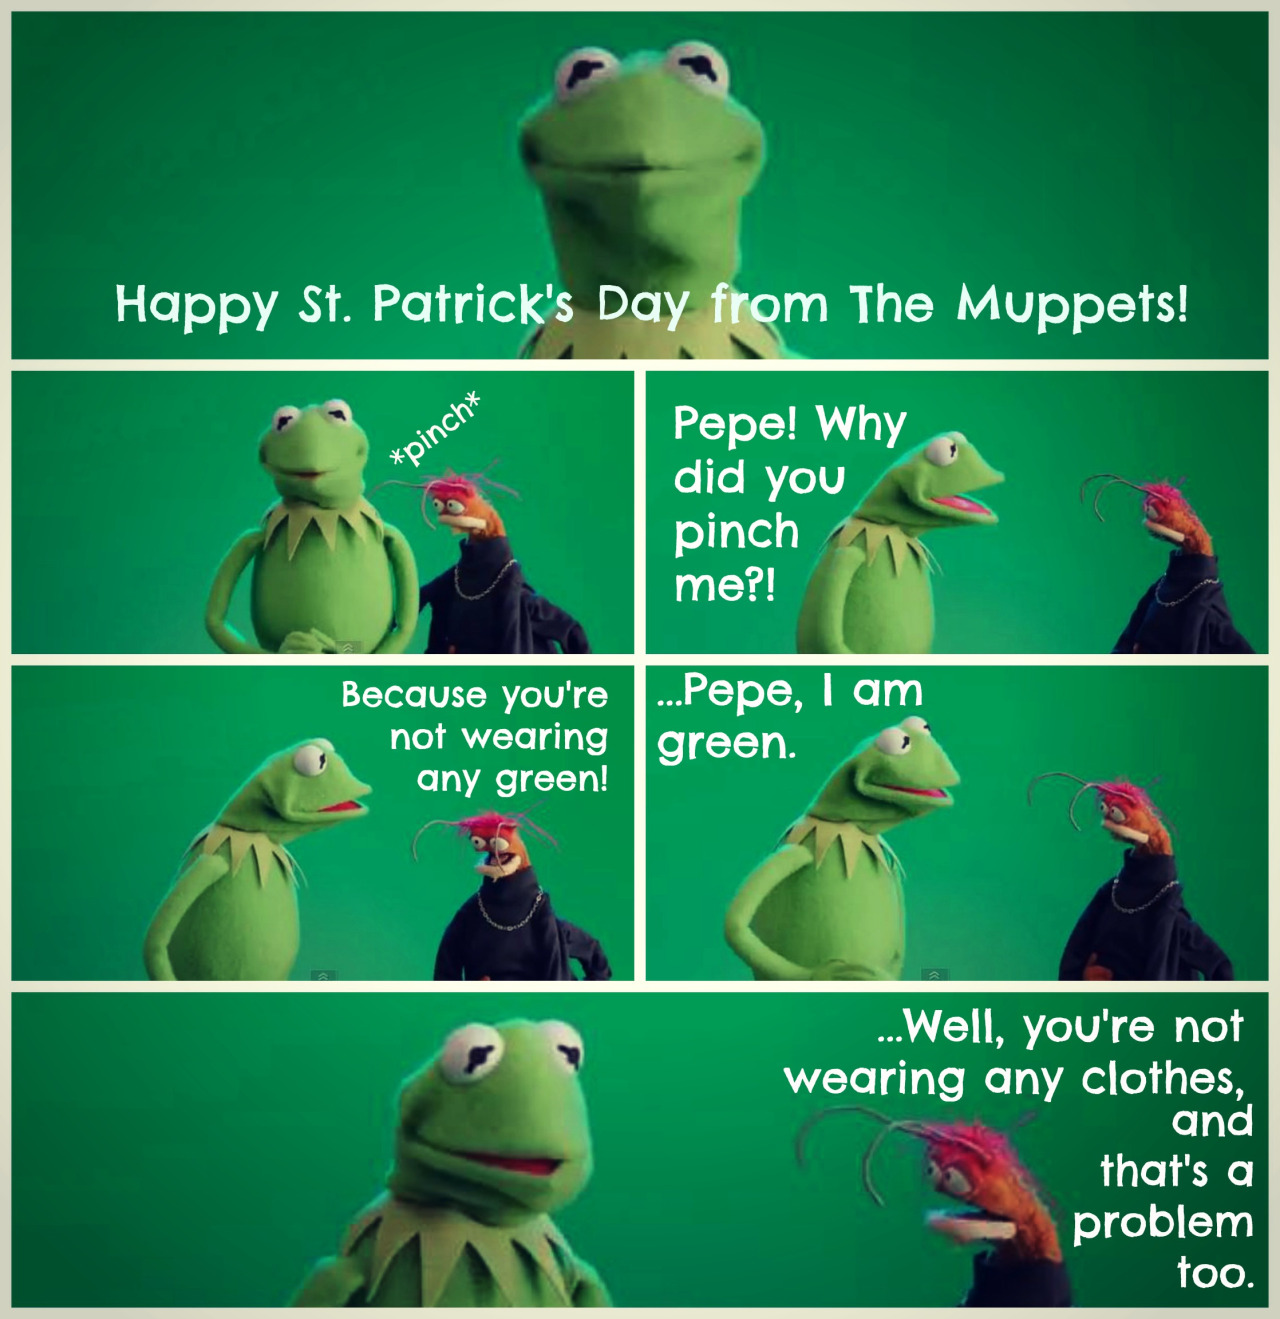 funny st patricks day memes - Happy St. Patrick's Day from The Muppets! pinch Pepe! Why did you pinch me?! Because you're not wearing any green! ...Pepe, I am green. ...Well, you're not wearing any clothes, and that's a problem too.